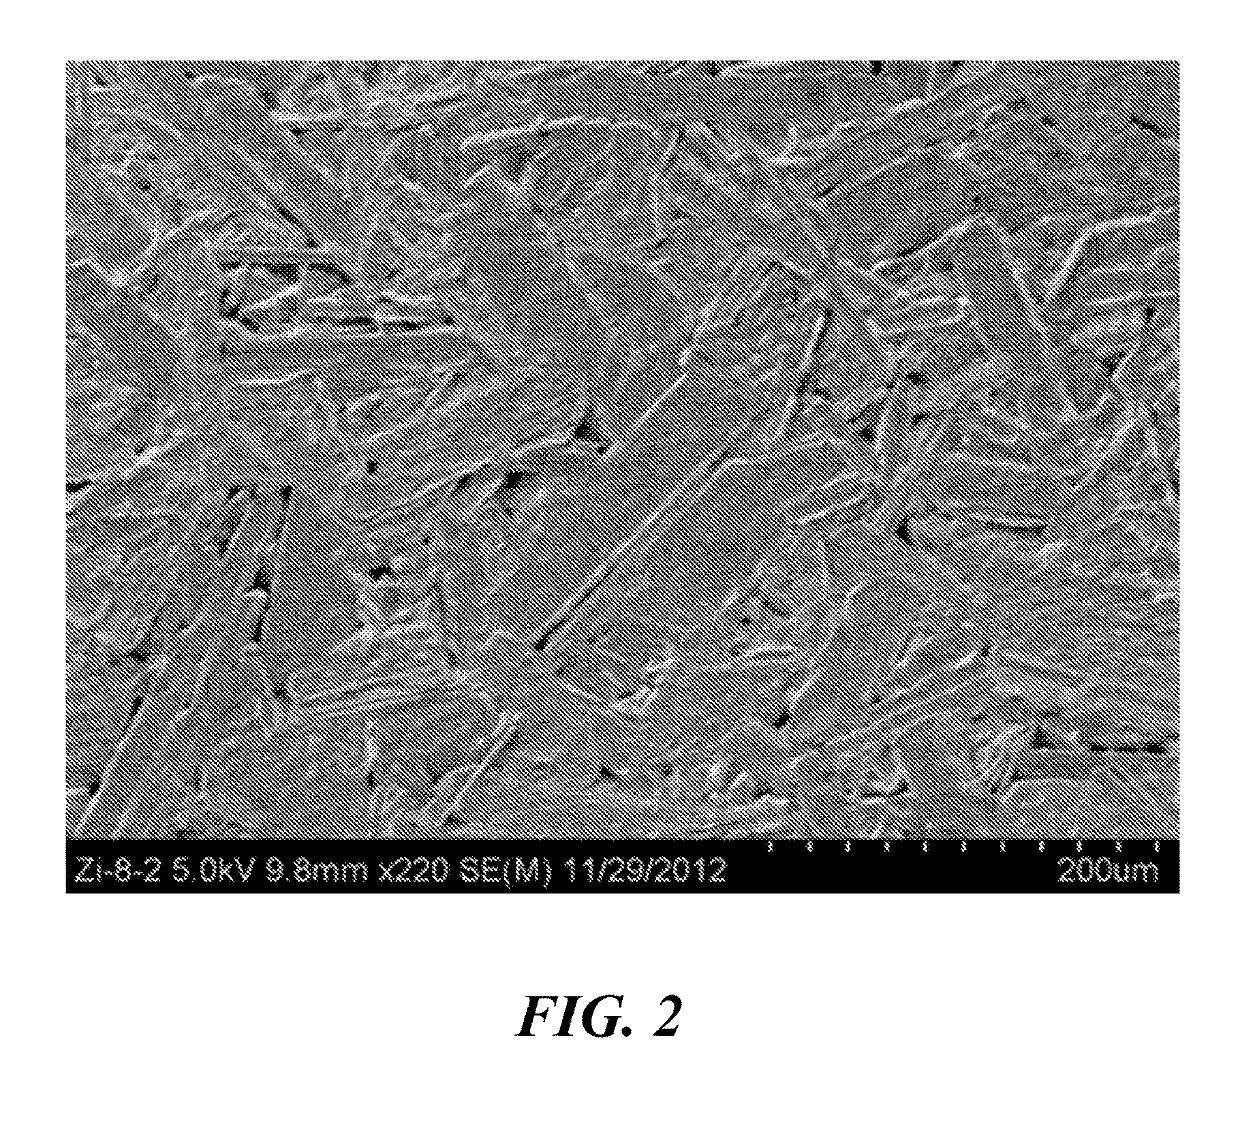 Co2 Z-type ferrite composite material for use in ultra-high frequency antennas